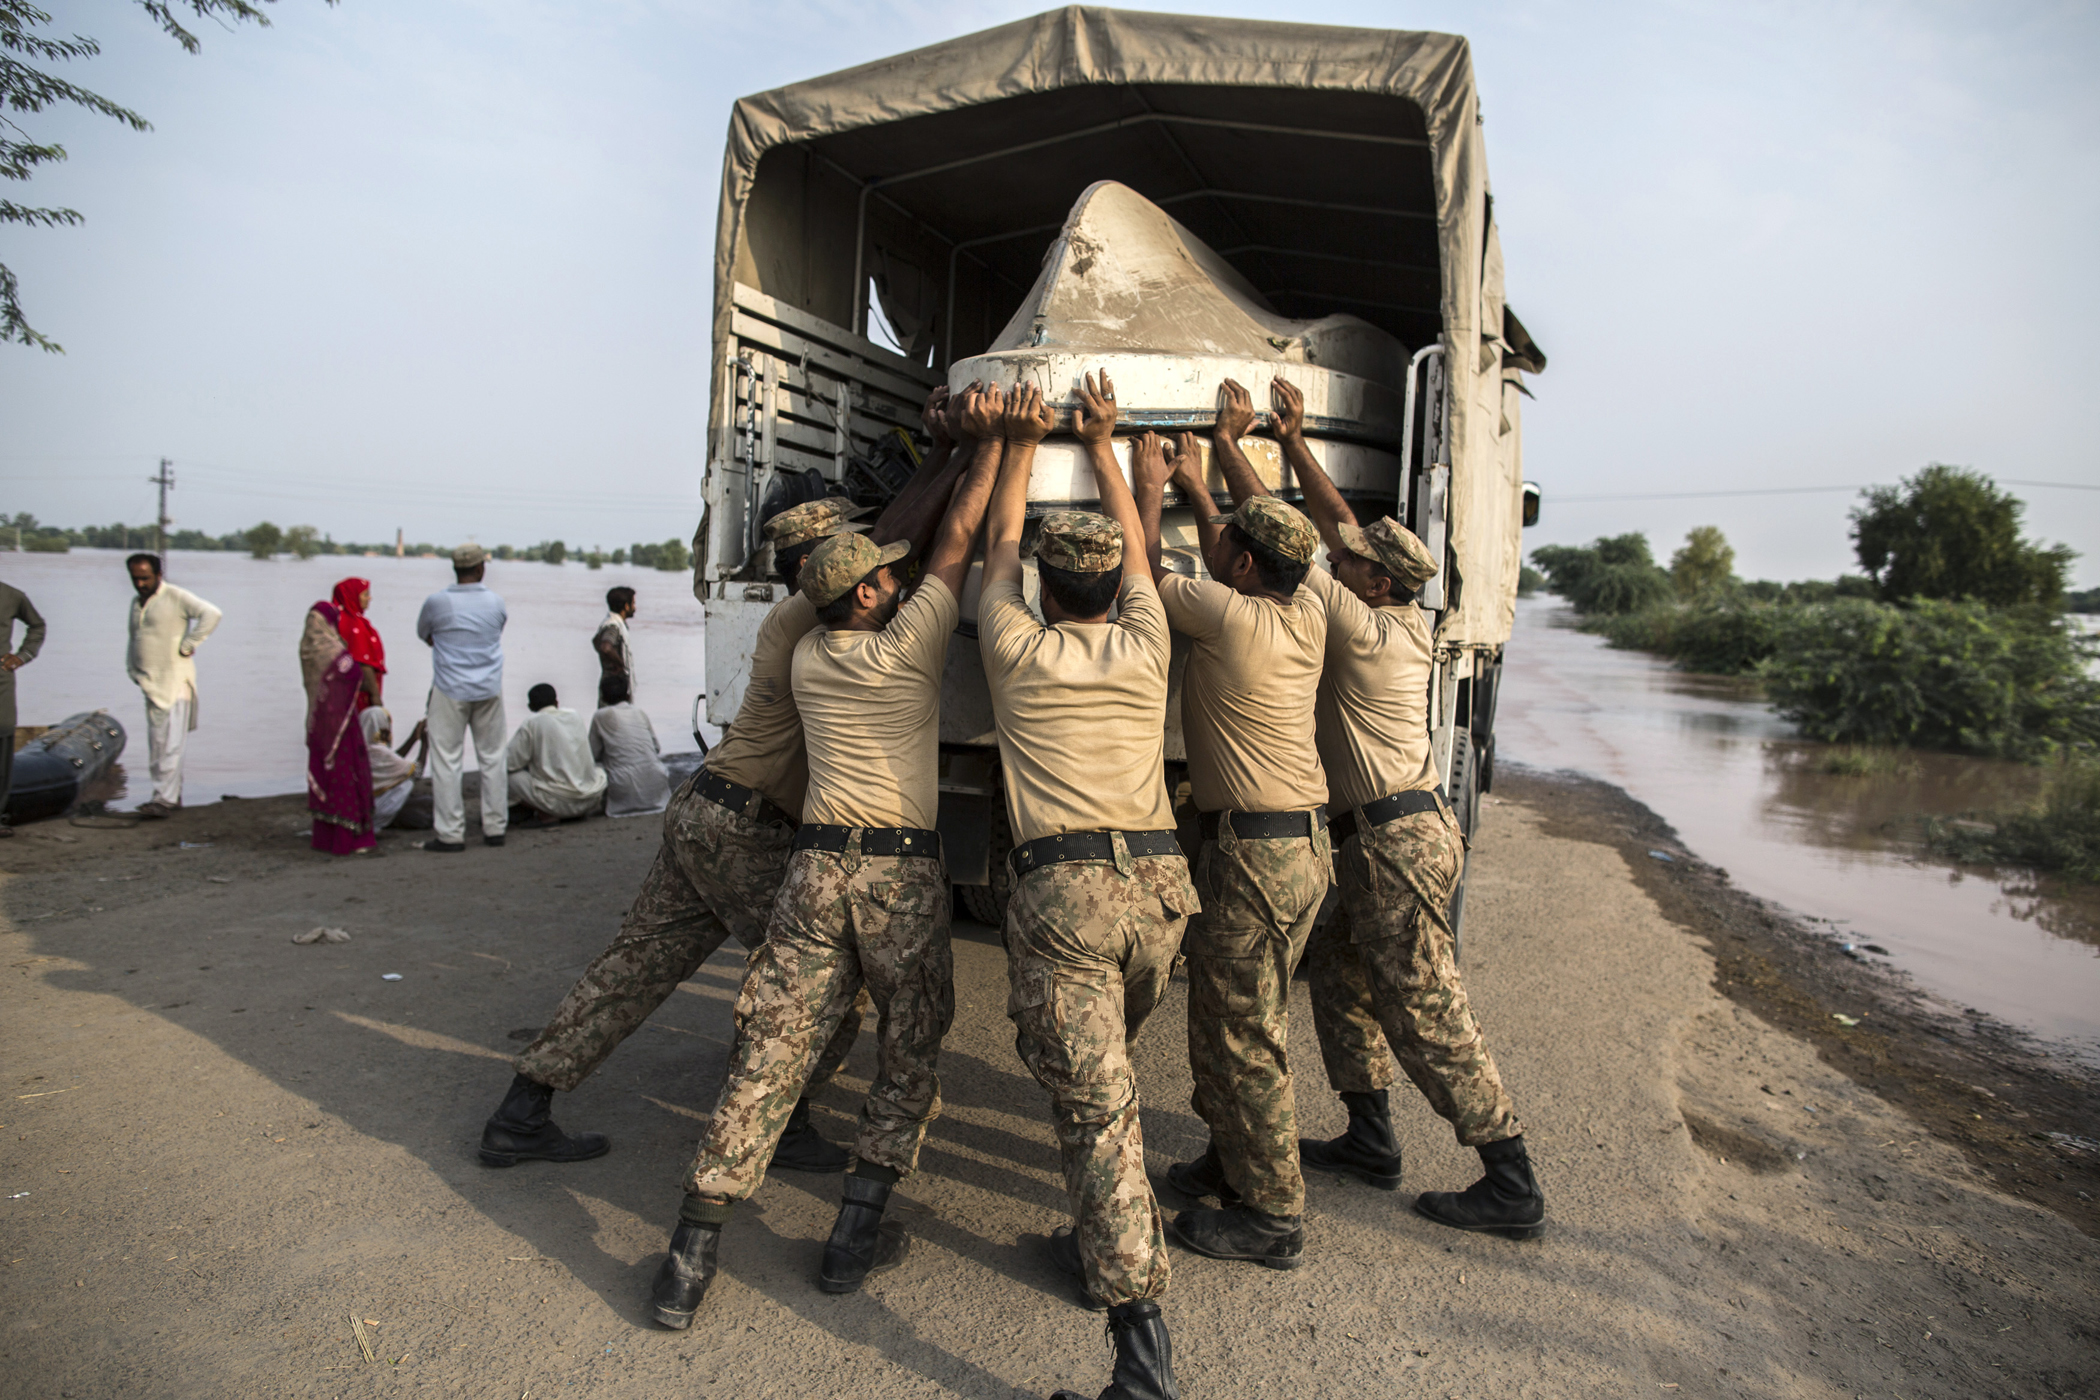 Army soldiers unload boats to be used for evacuating flood victims from their flooded houses following heavy rain in Jhang, Punjab province, Pakistan, Sept. 10, 2014.